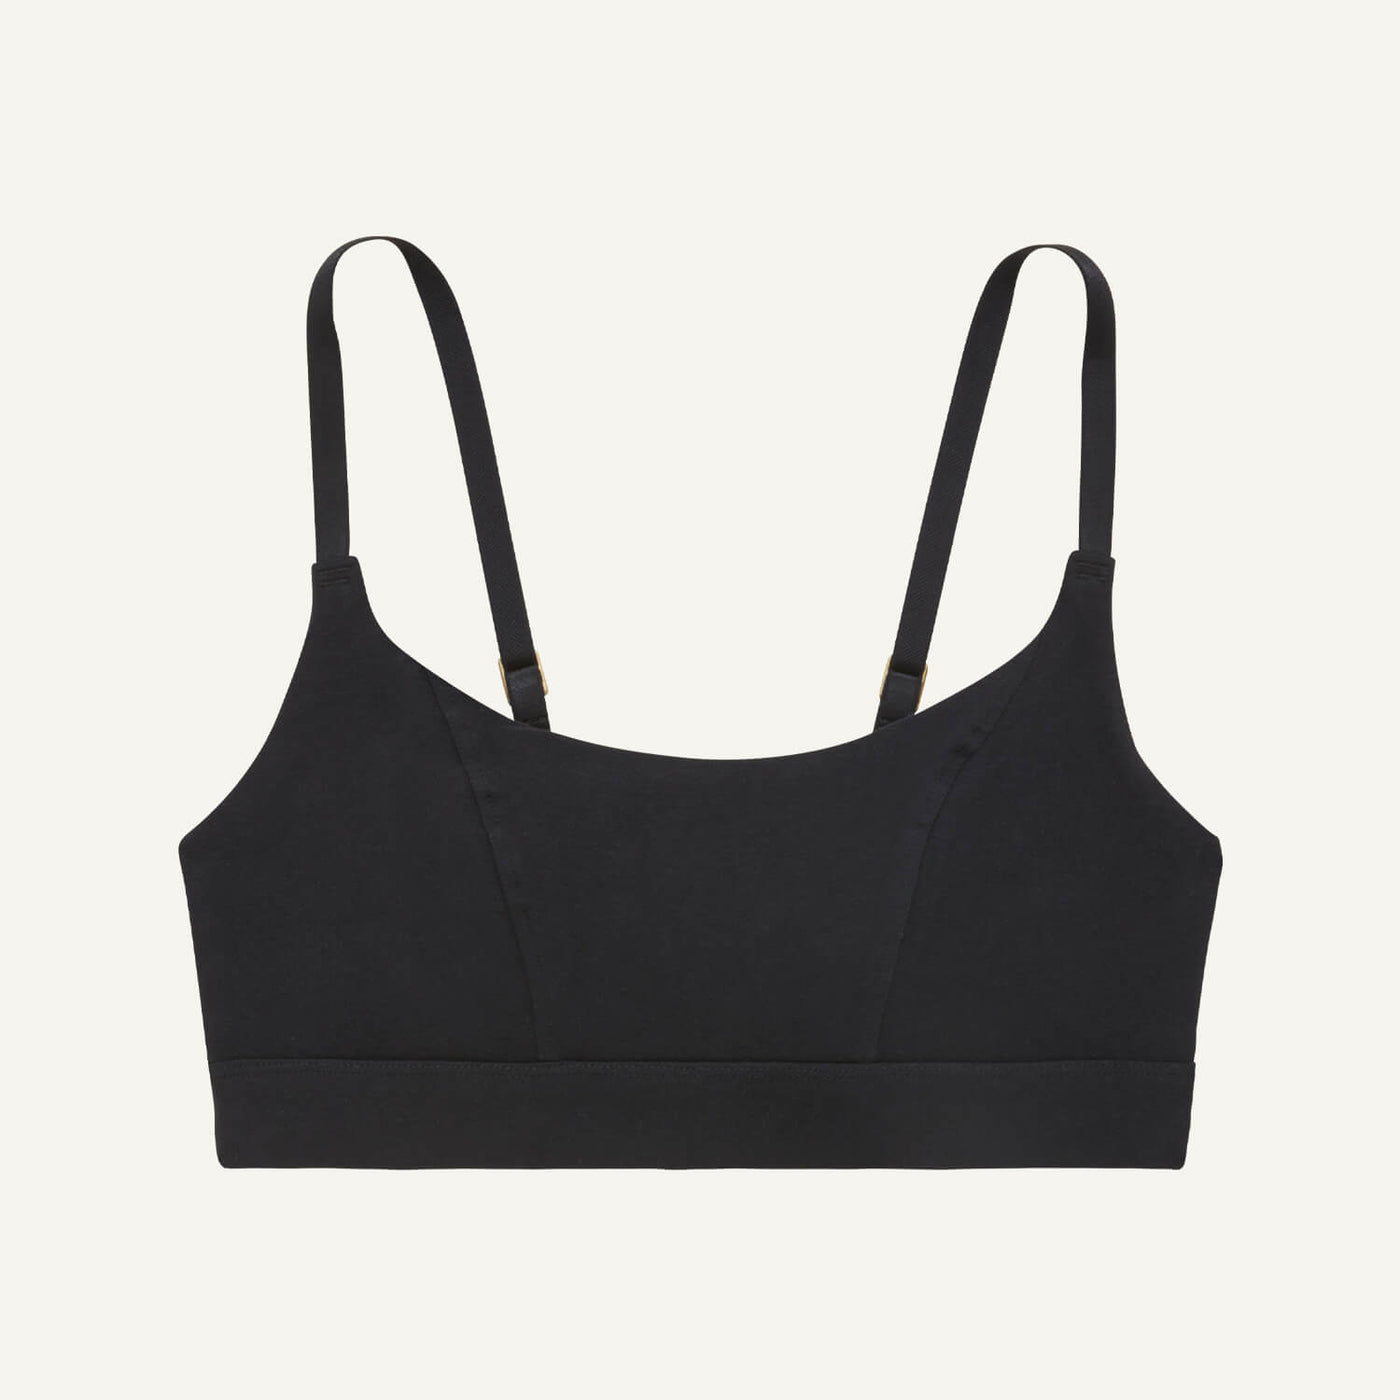 Subset Organic Cotton Tank Bralette: Available in sizes 2XS-3XL